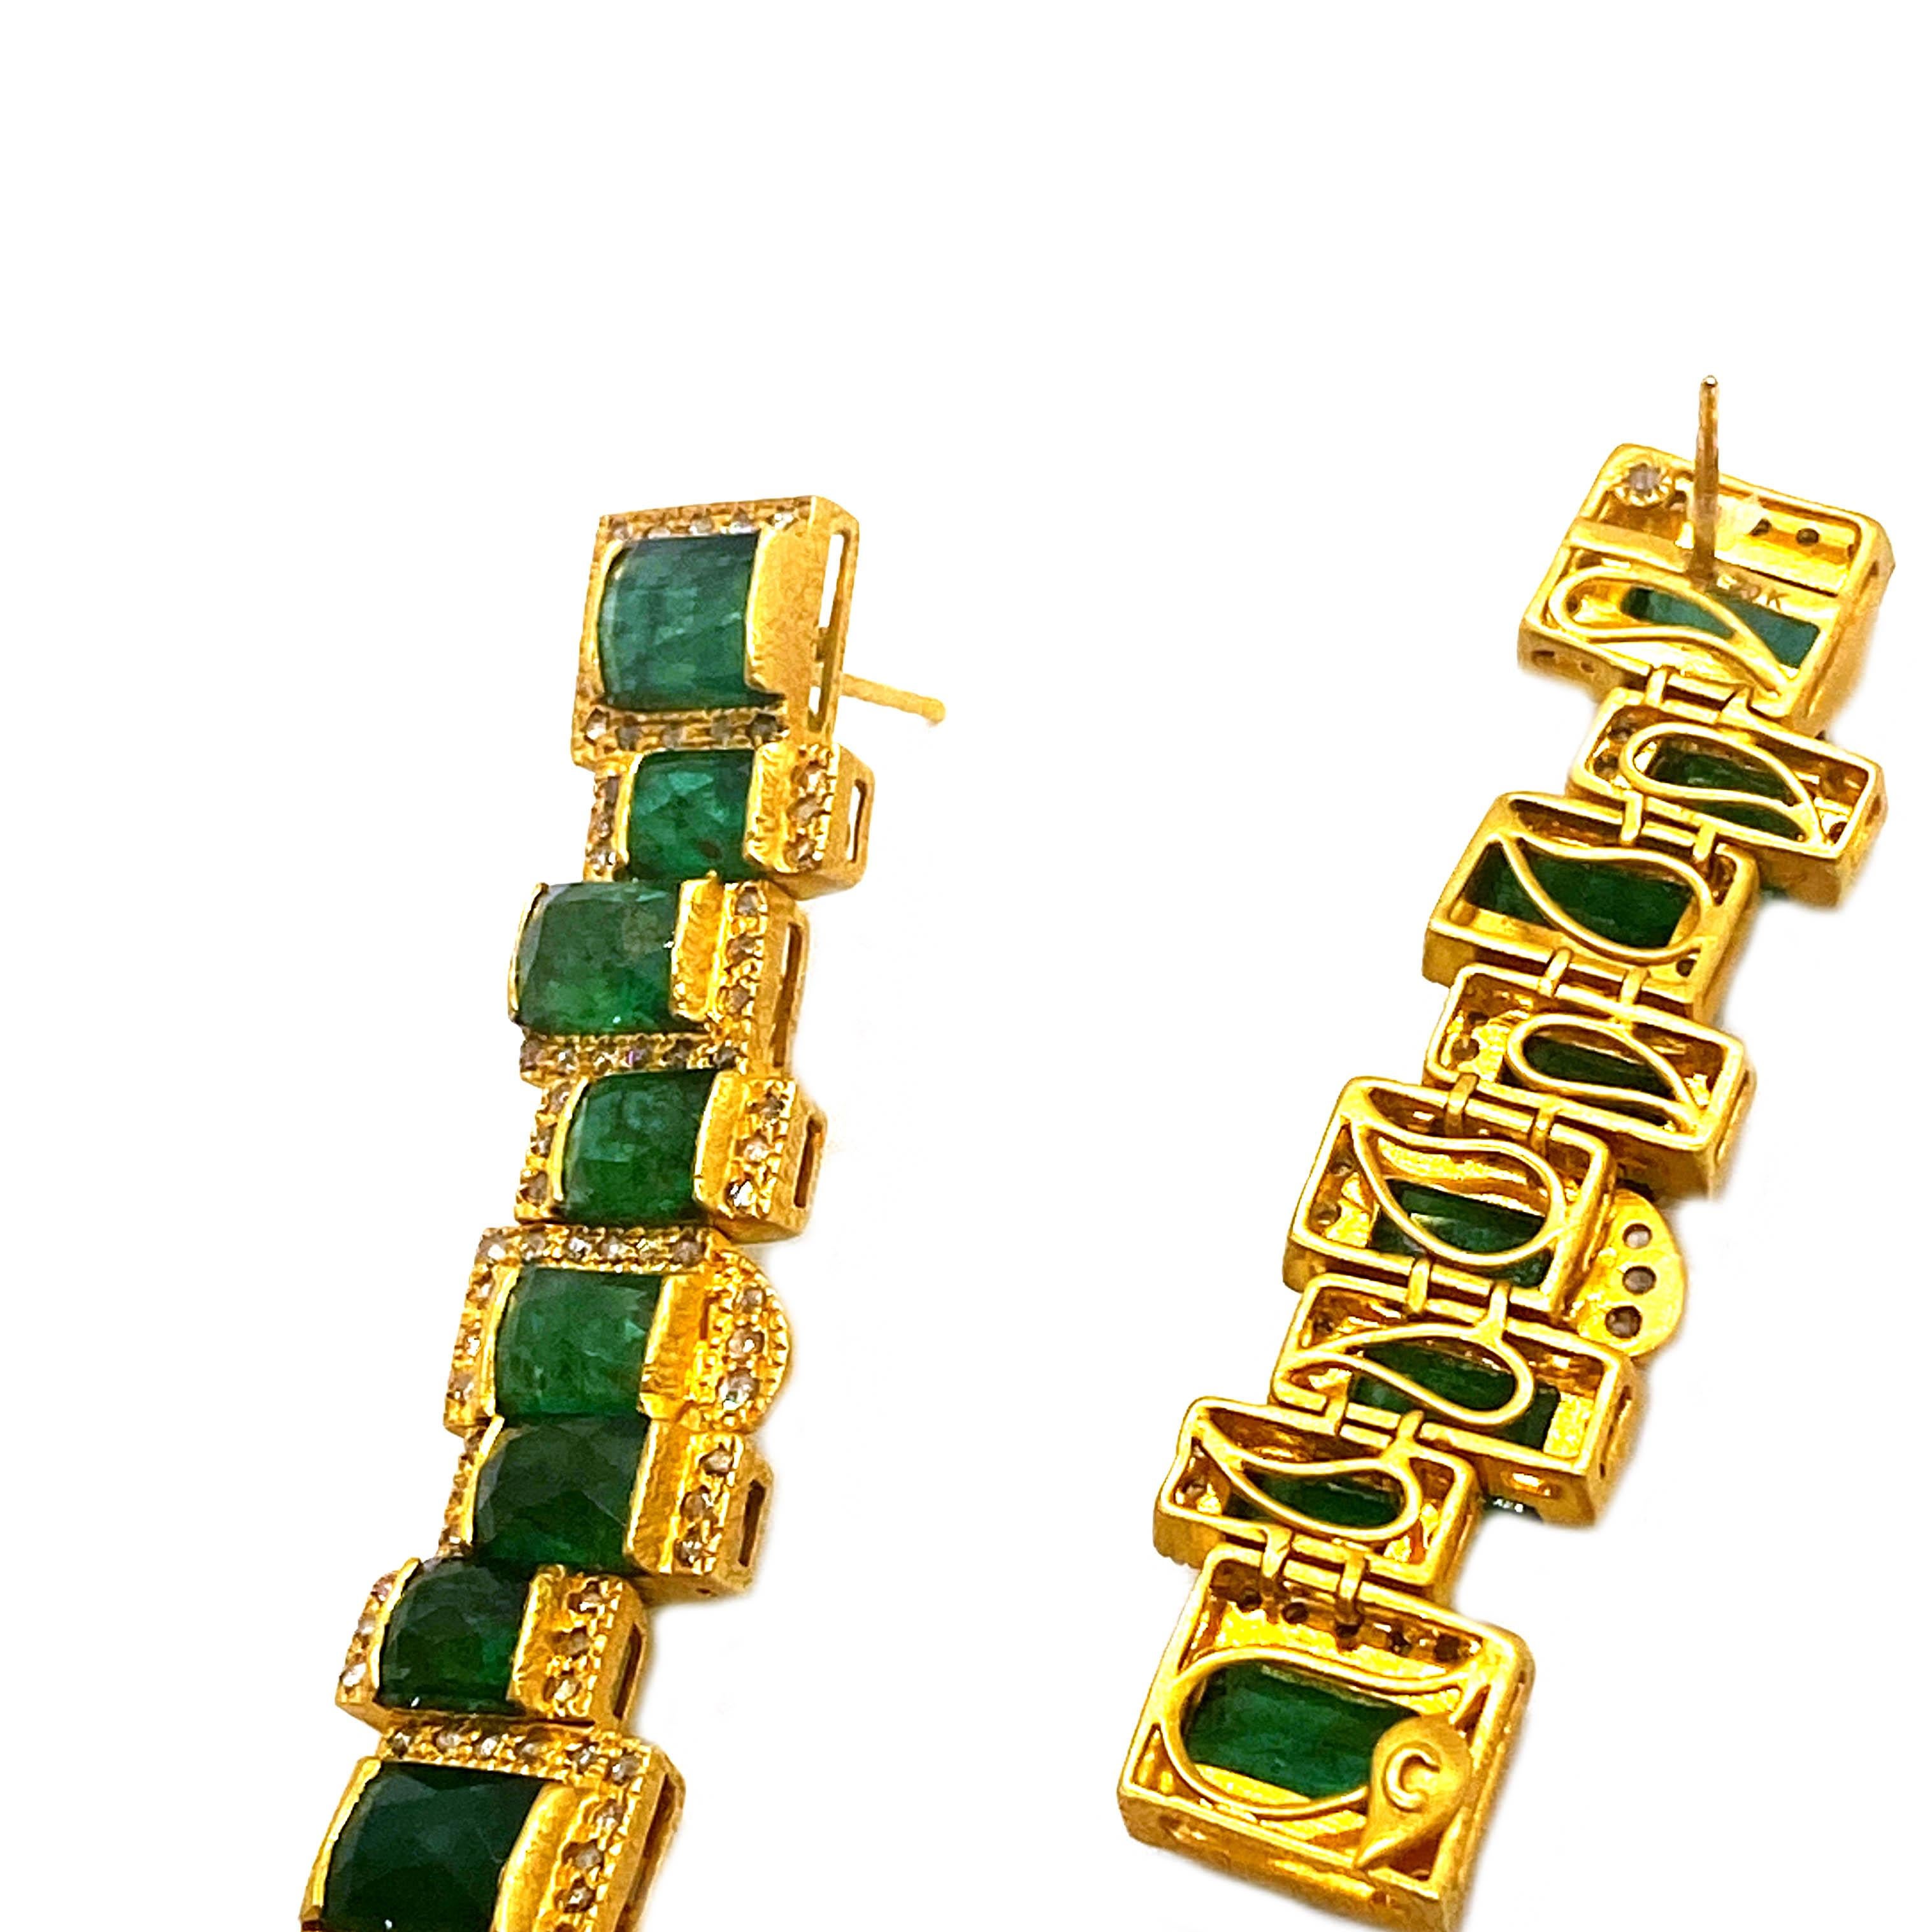 Spectacular Coomi Drop earrings crafted in 20K yellow gold showcasing Emerald weighing approximately 15.86cts and brilliant-cut diamonds weighing approximately 1.40cts, inspired by Art Deco and Mosaic art from the Luminosity Collection of Coomi,